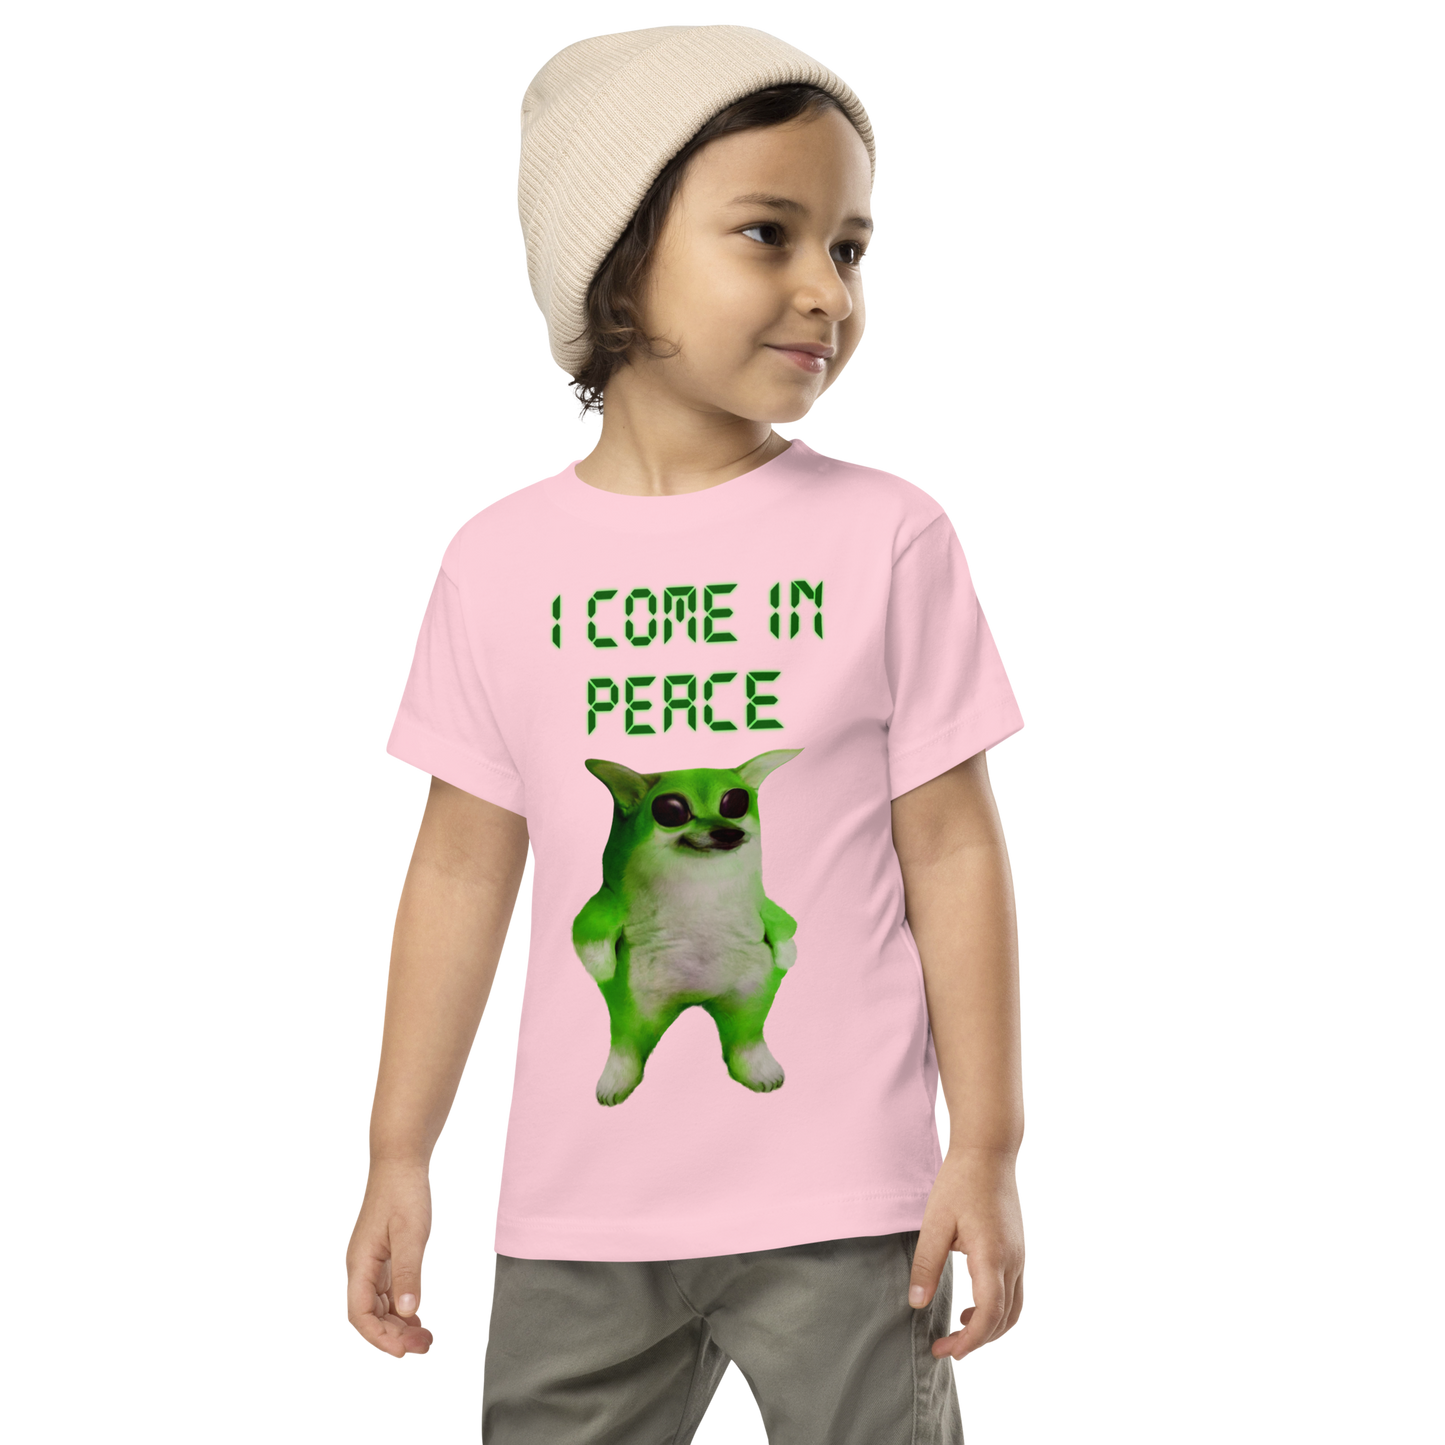 NAFO I Come in Peace Toddler T-Shirt